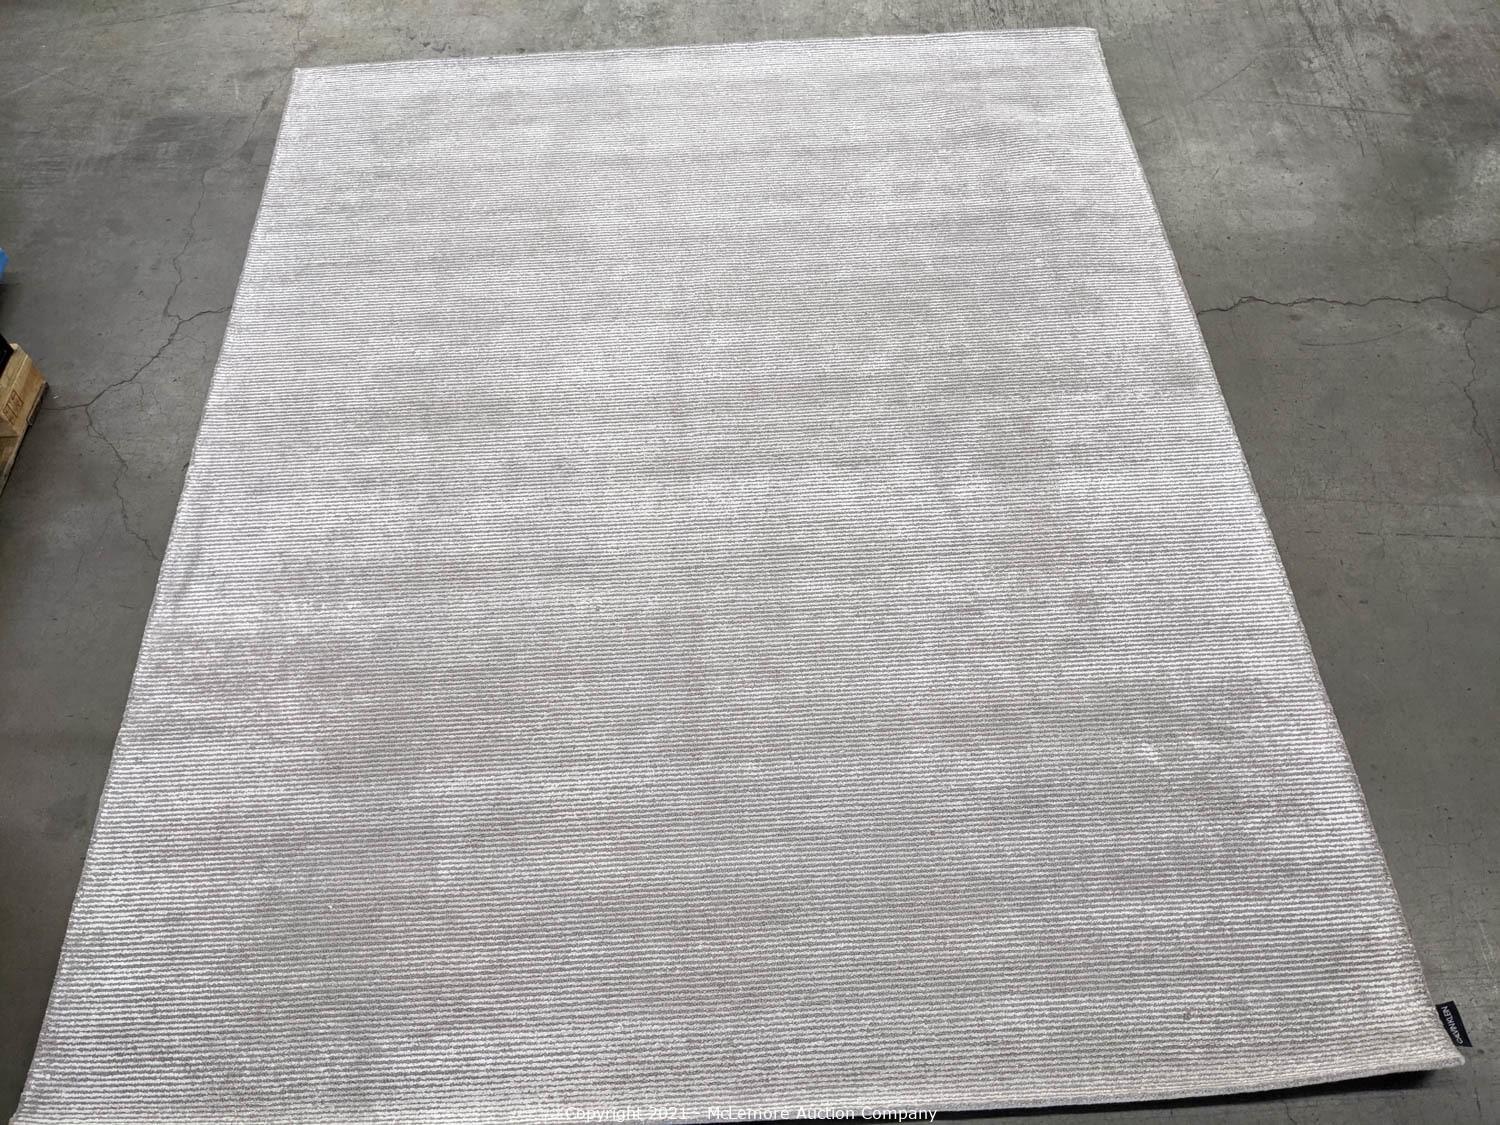 McLemore Auction Company - Auction: Brand New Rugs, Runners, Accent Rugs,  Bathroom, Kitchen and Bath Mats from a Large Warehouse Club Retailer ITEM: Calvin  Klein Revine CK221 Furrow Fog - Ravoi Fog -